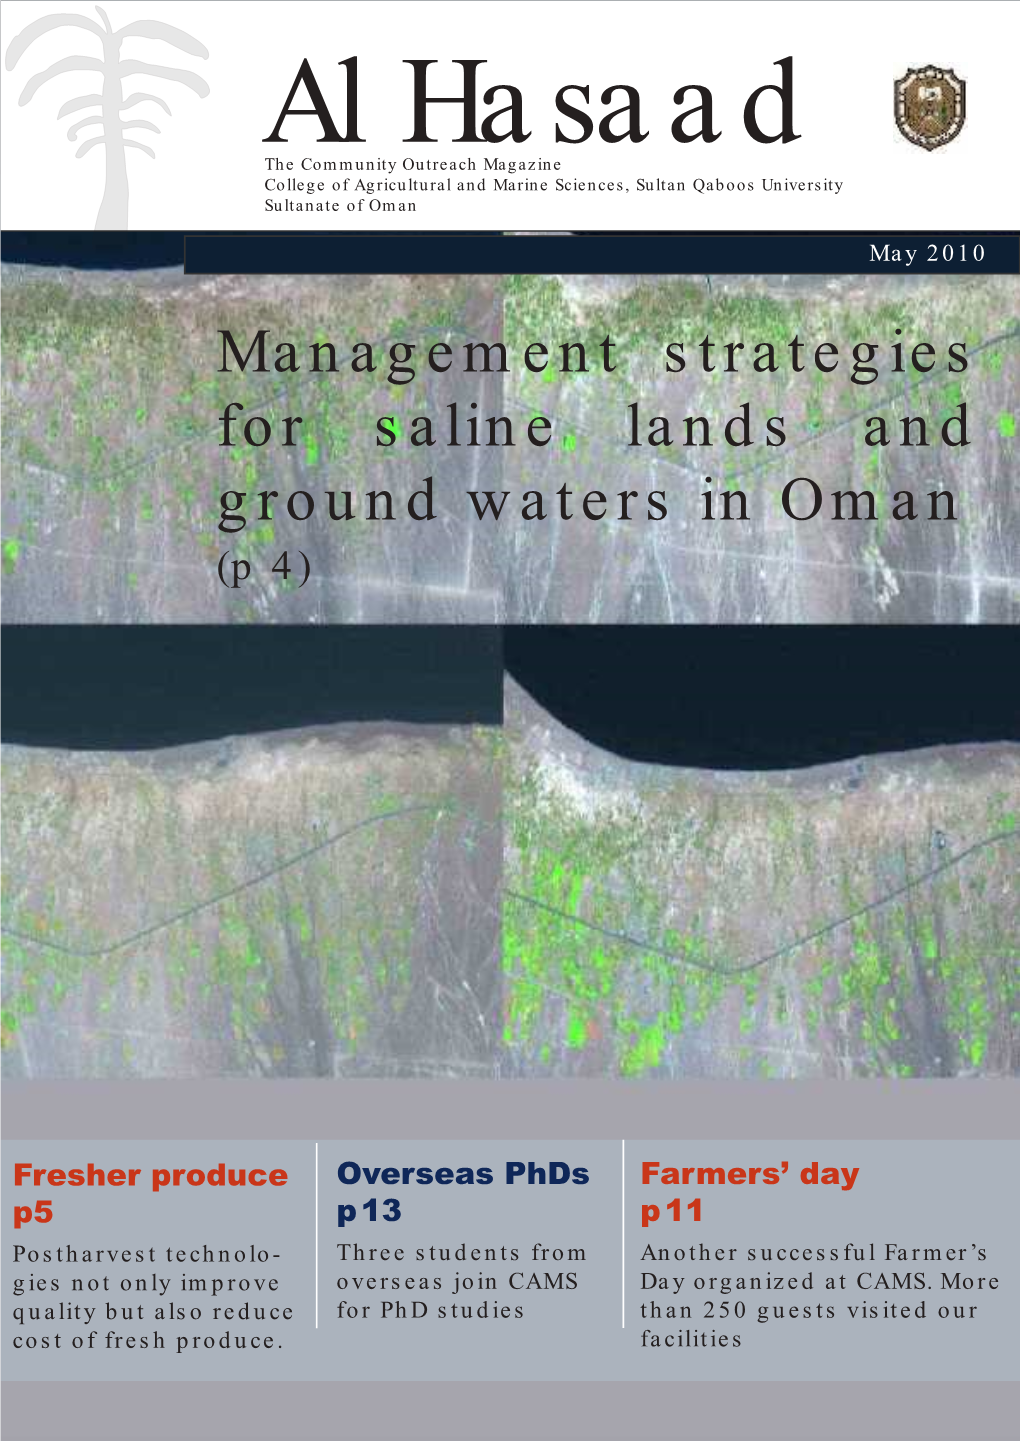 Management Strategies for Saline Lands and Ground Waters in Oman (P 4)